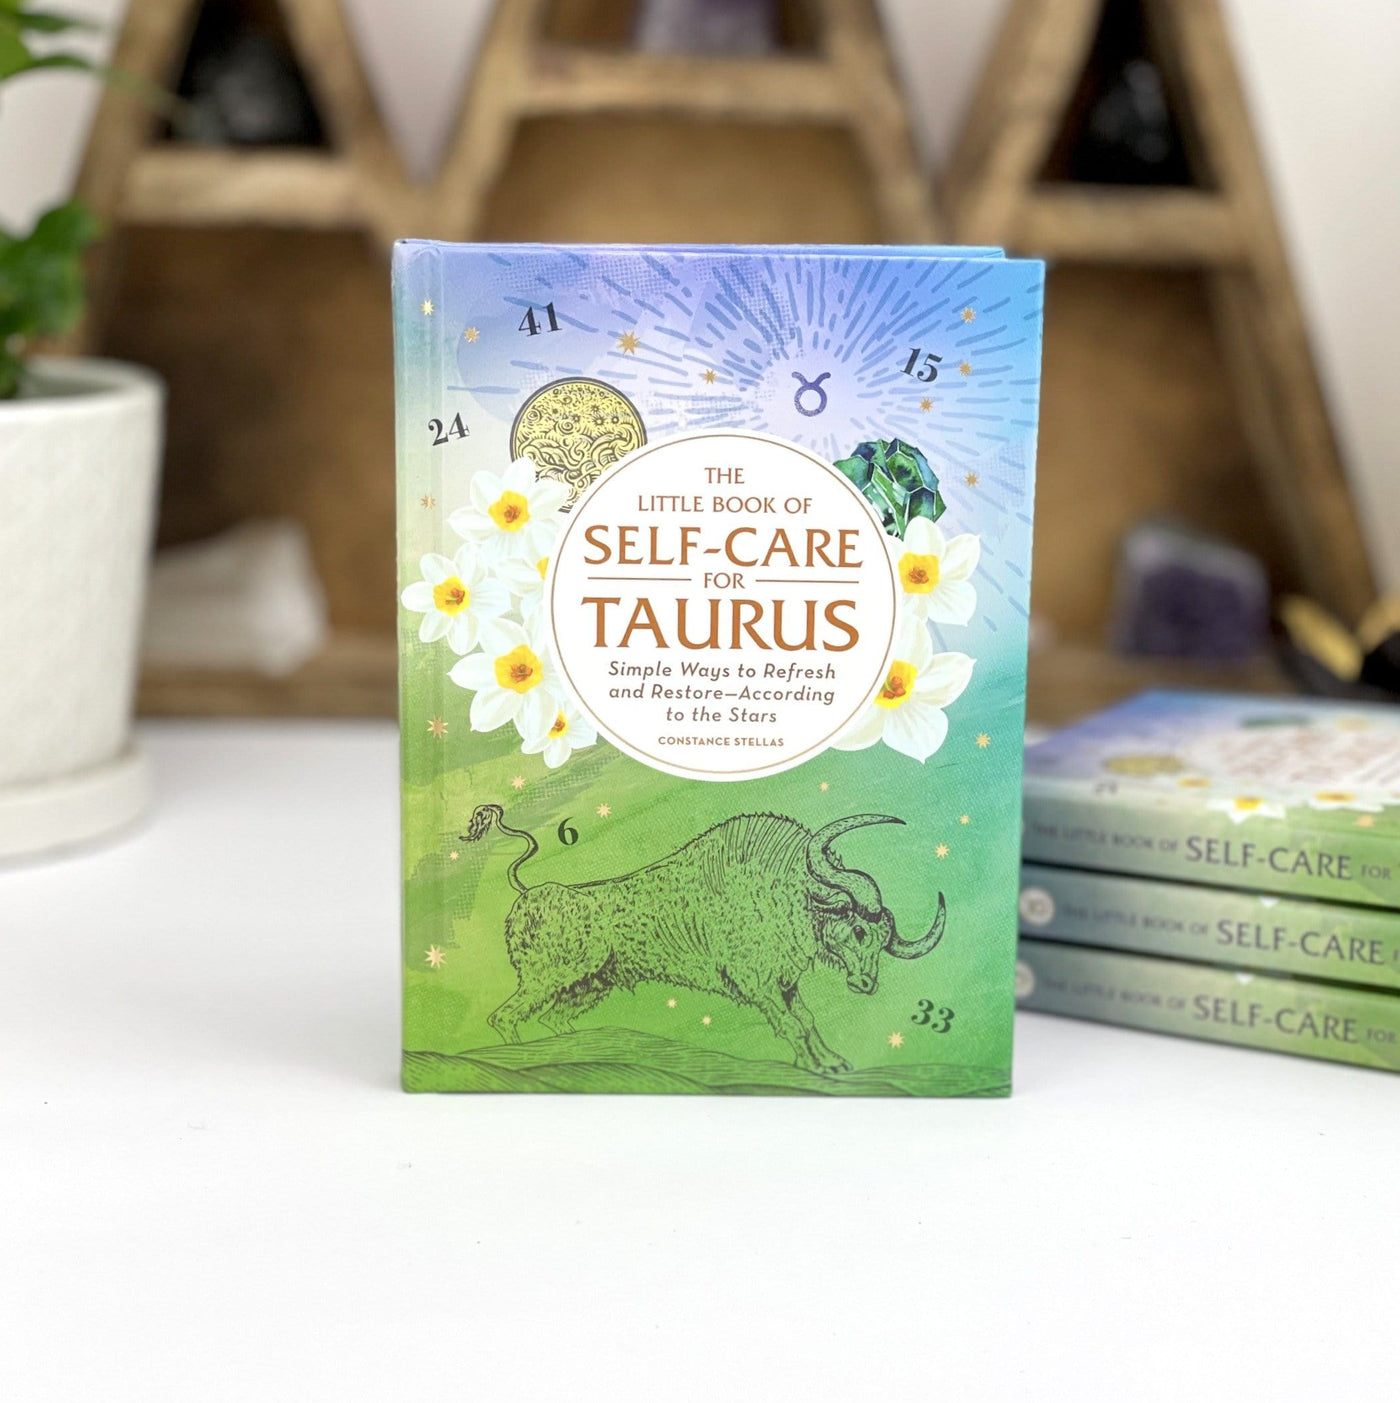  The Little Book of Self-Care for Taurus in blue green